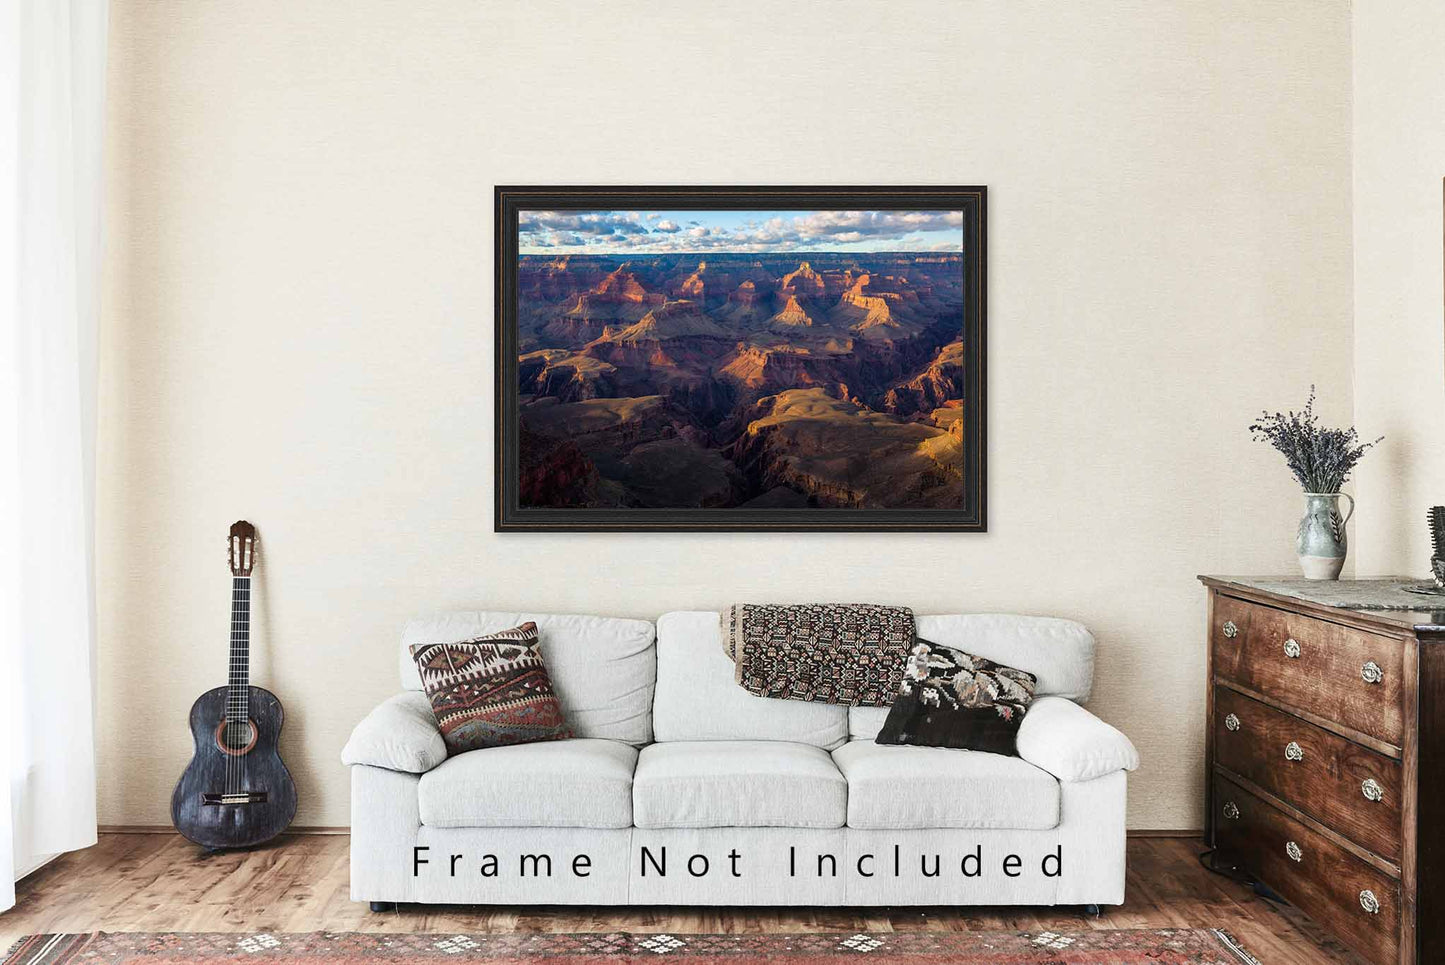 Southwest Photography Print - Picture of the Grand Canyon in Arizona National Park Home Decor Landscape Wall Art Desert Photo Artwork